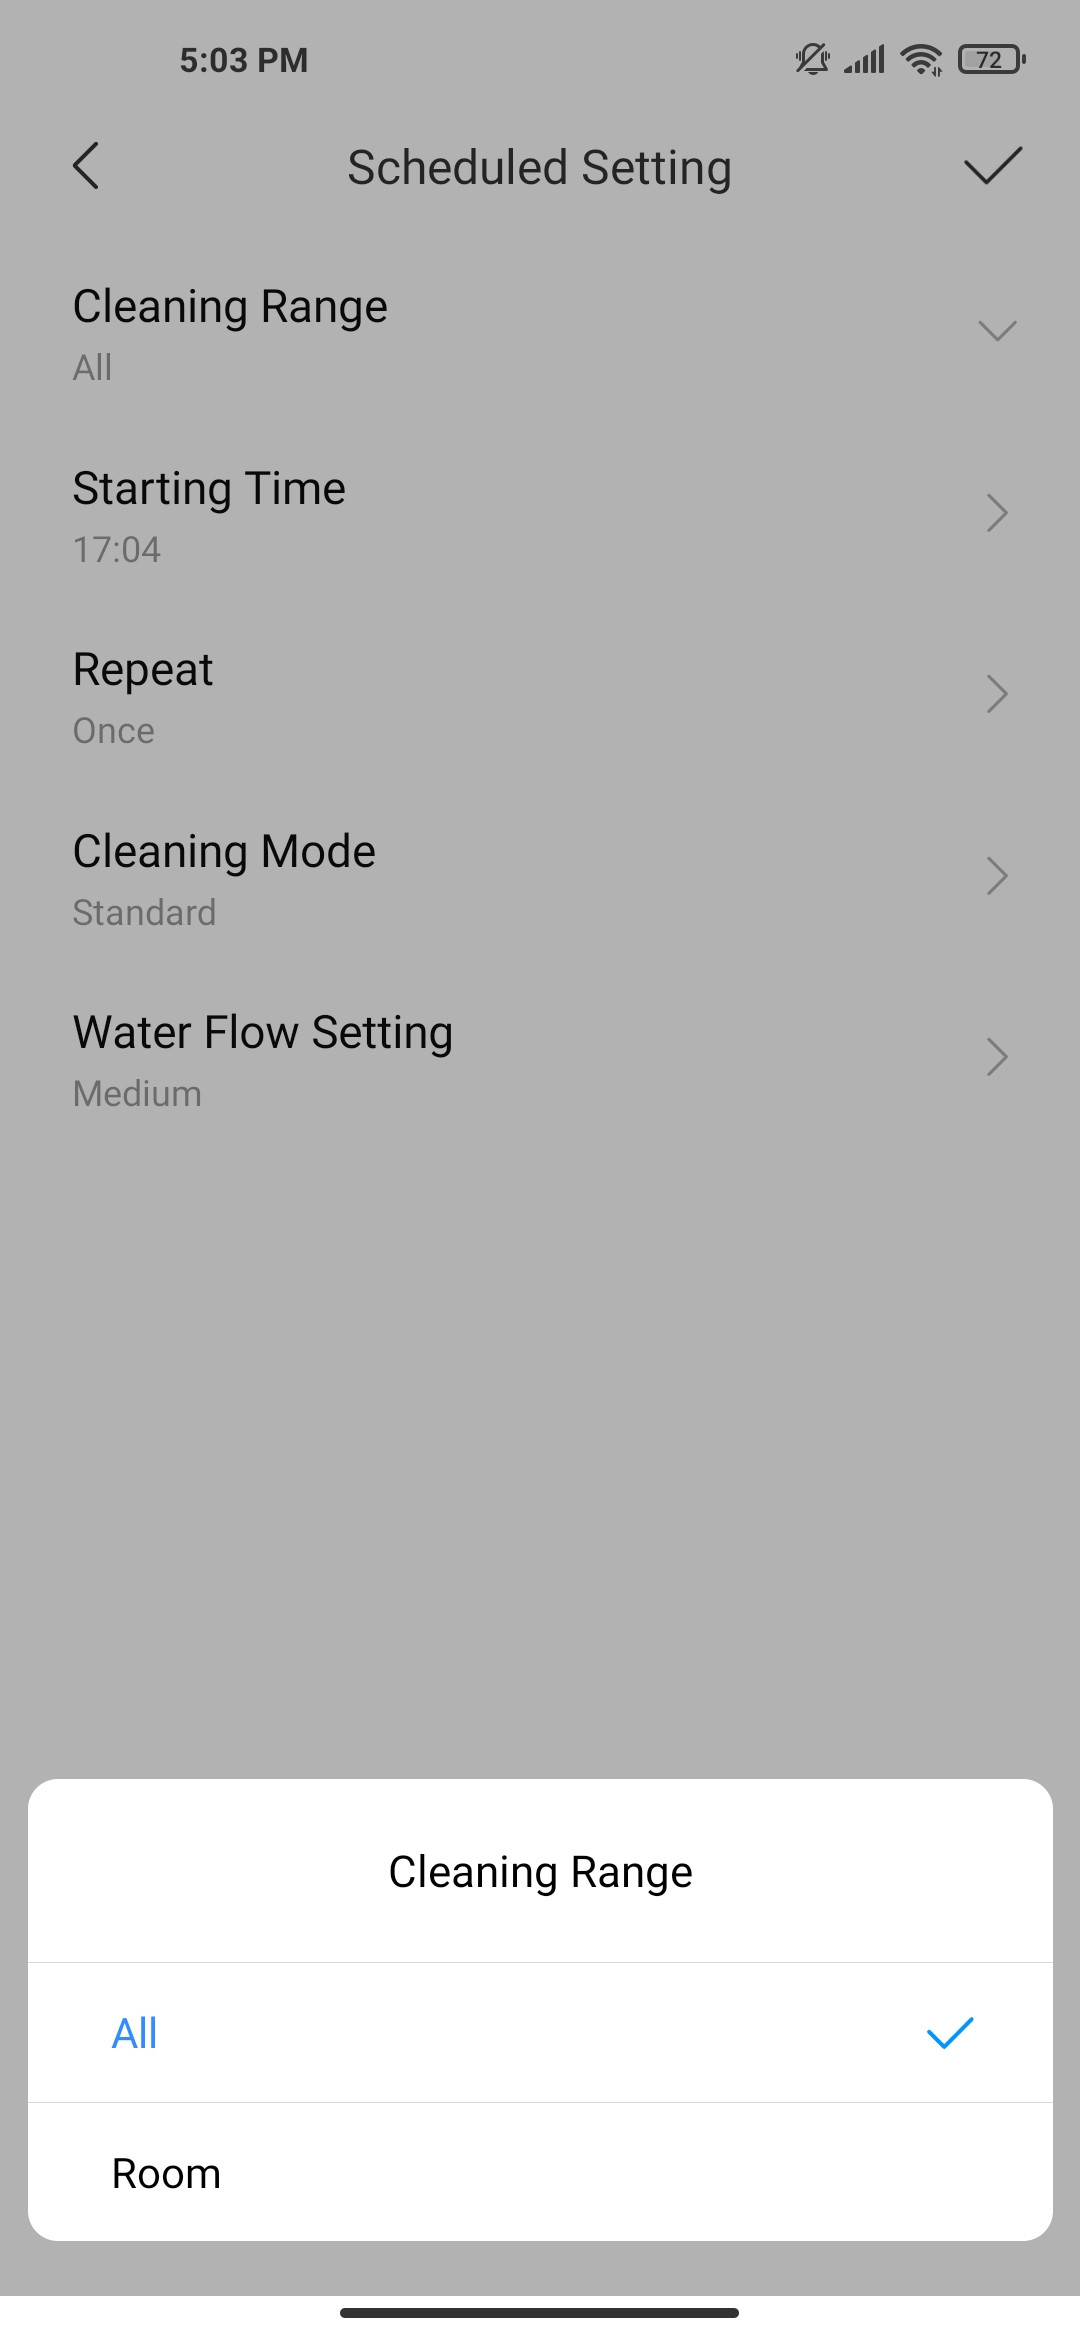 Scheduled settings